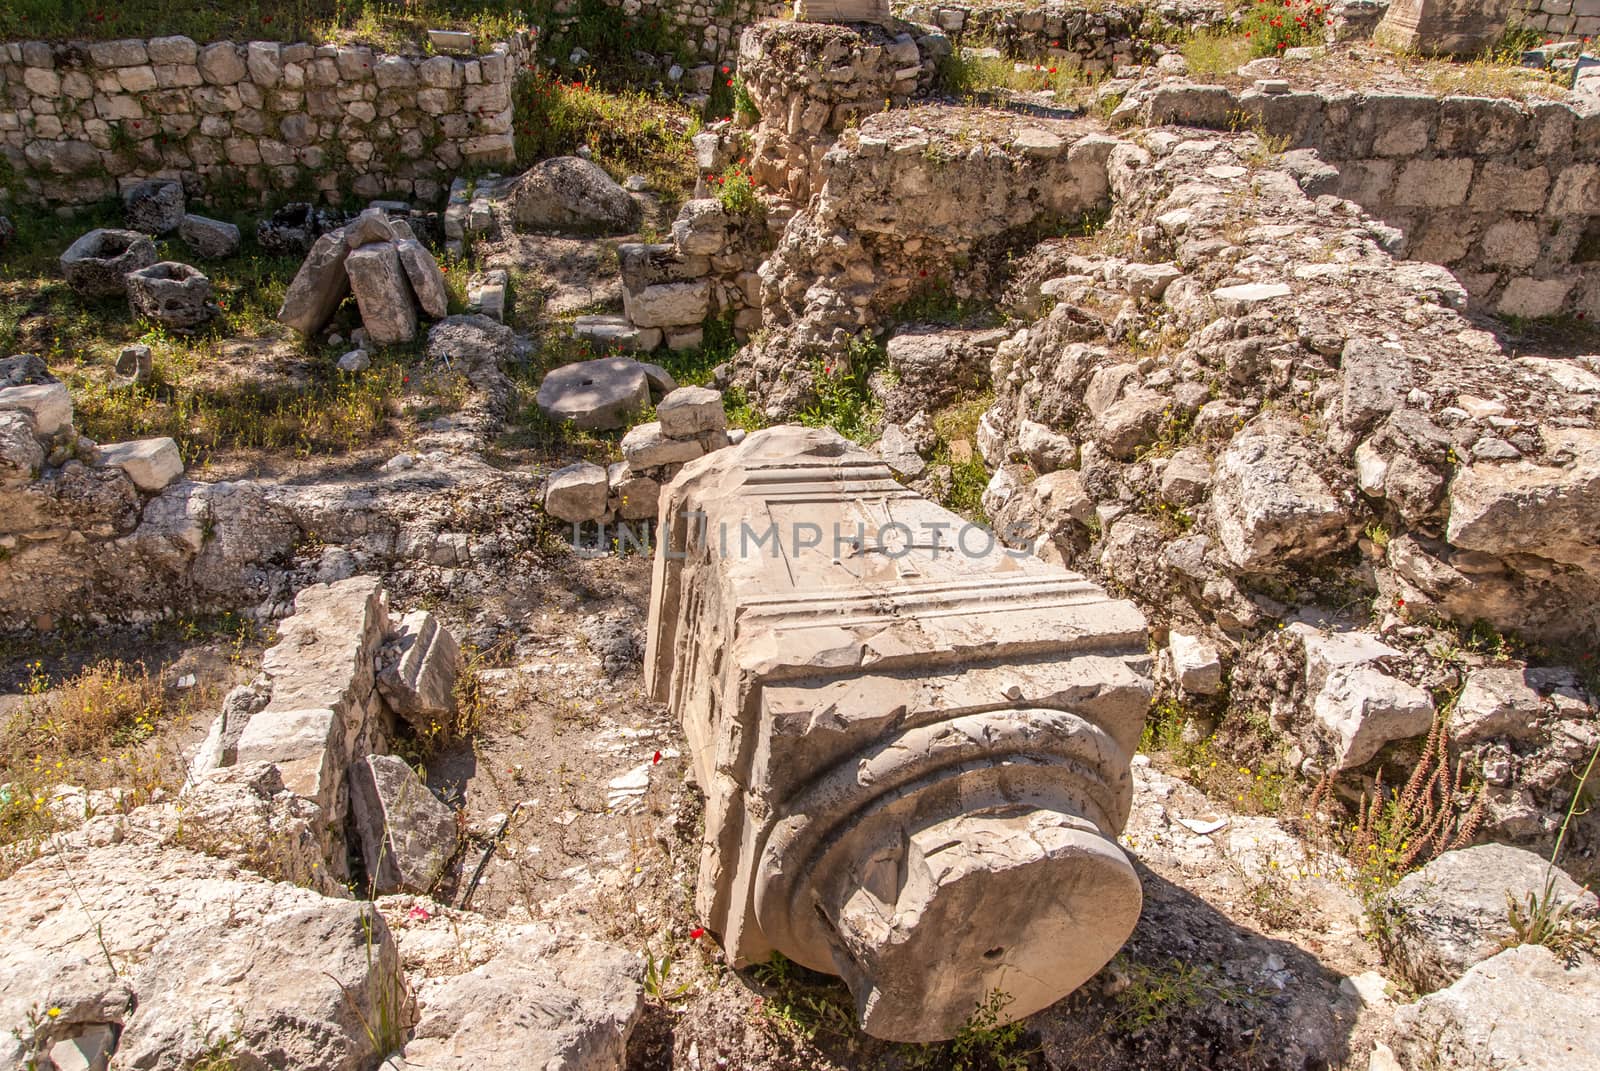 Ruins of the Temple of Serapis in Jerusalem